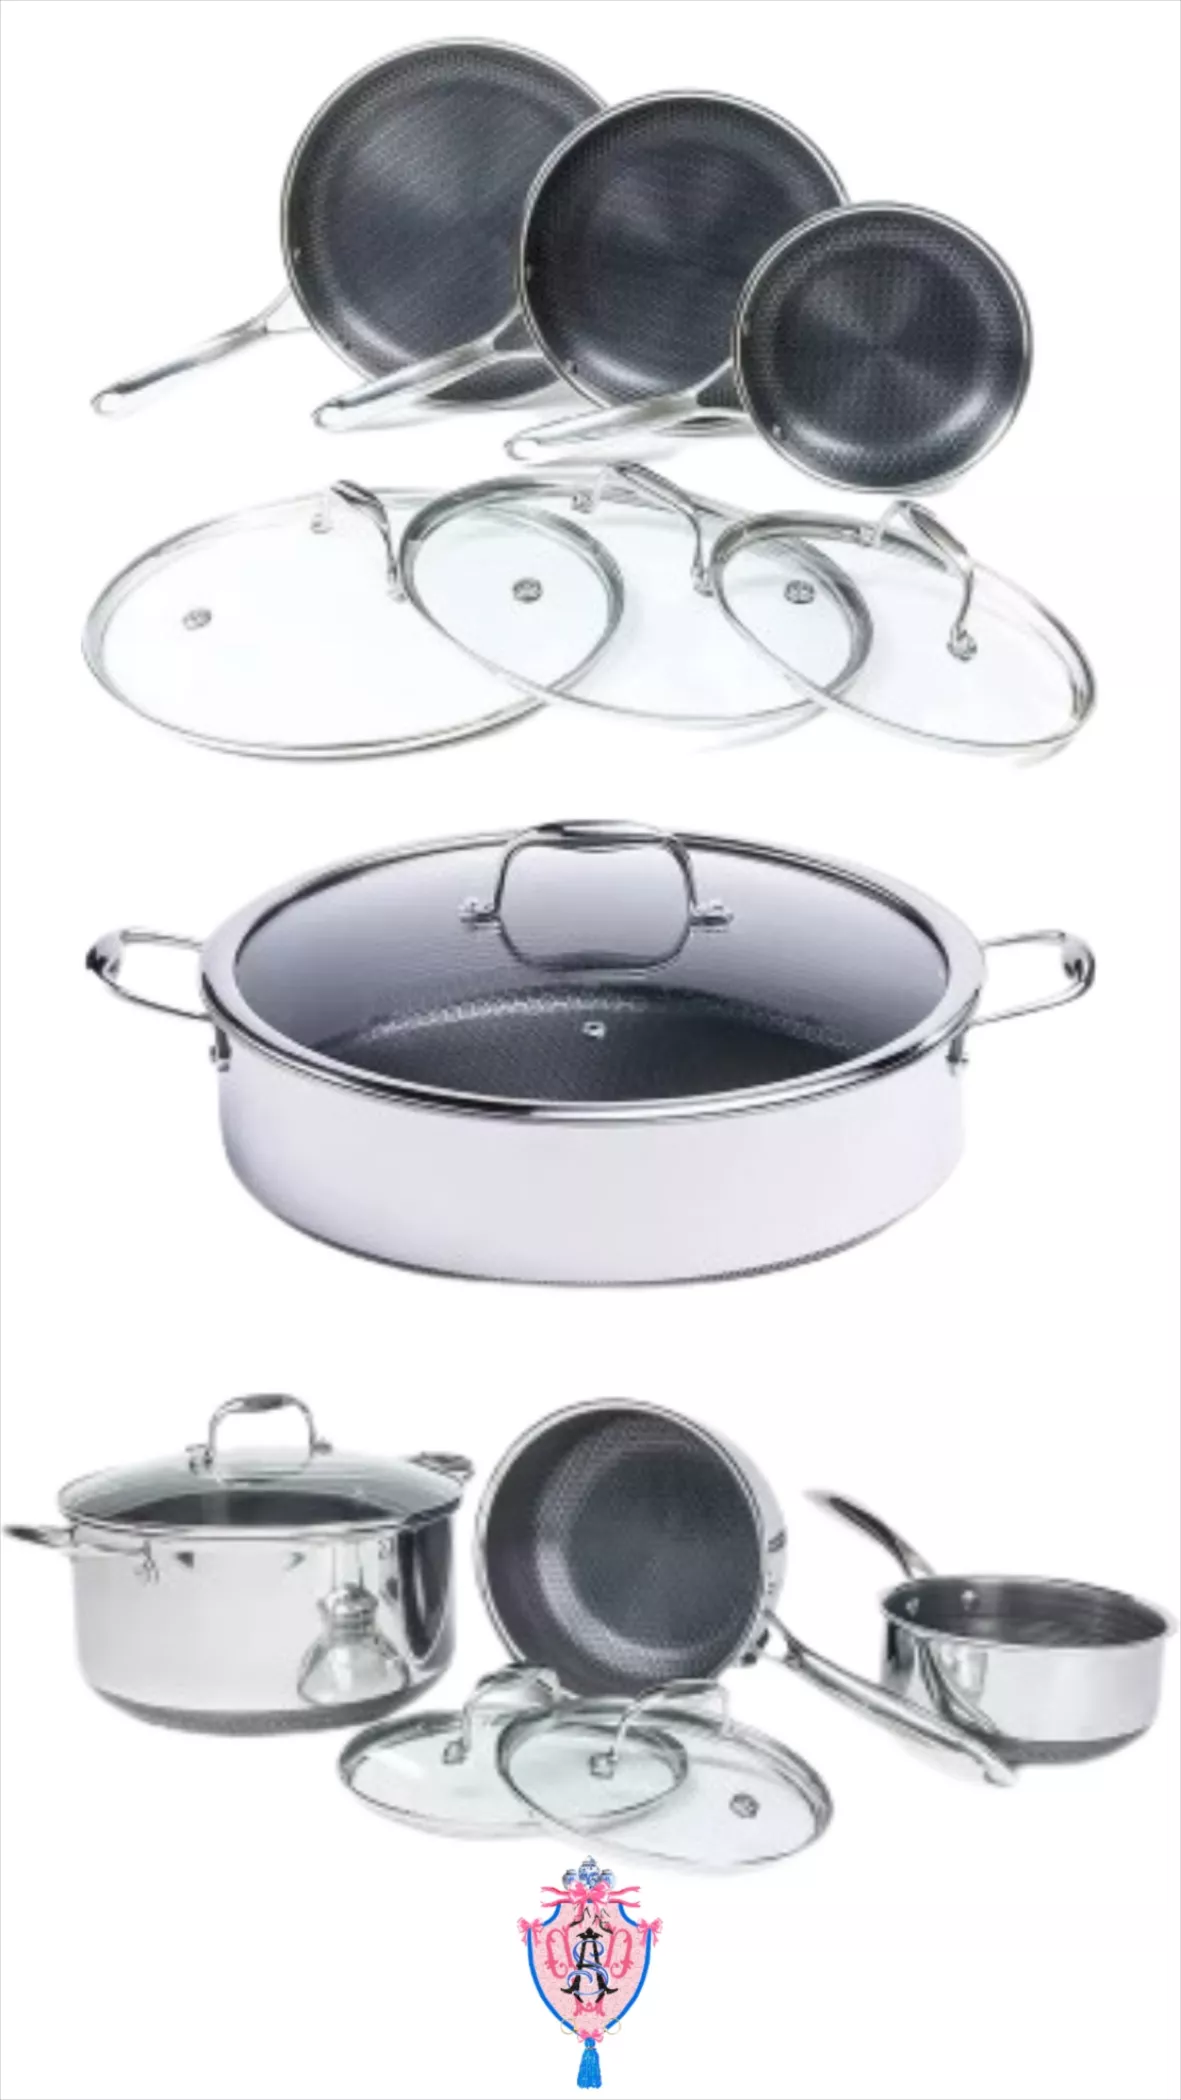 Hexclad 8 Quart Hybrid Stainless Steel Pot Saucepan With Glass Lid